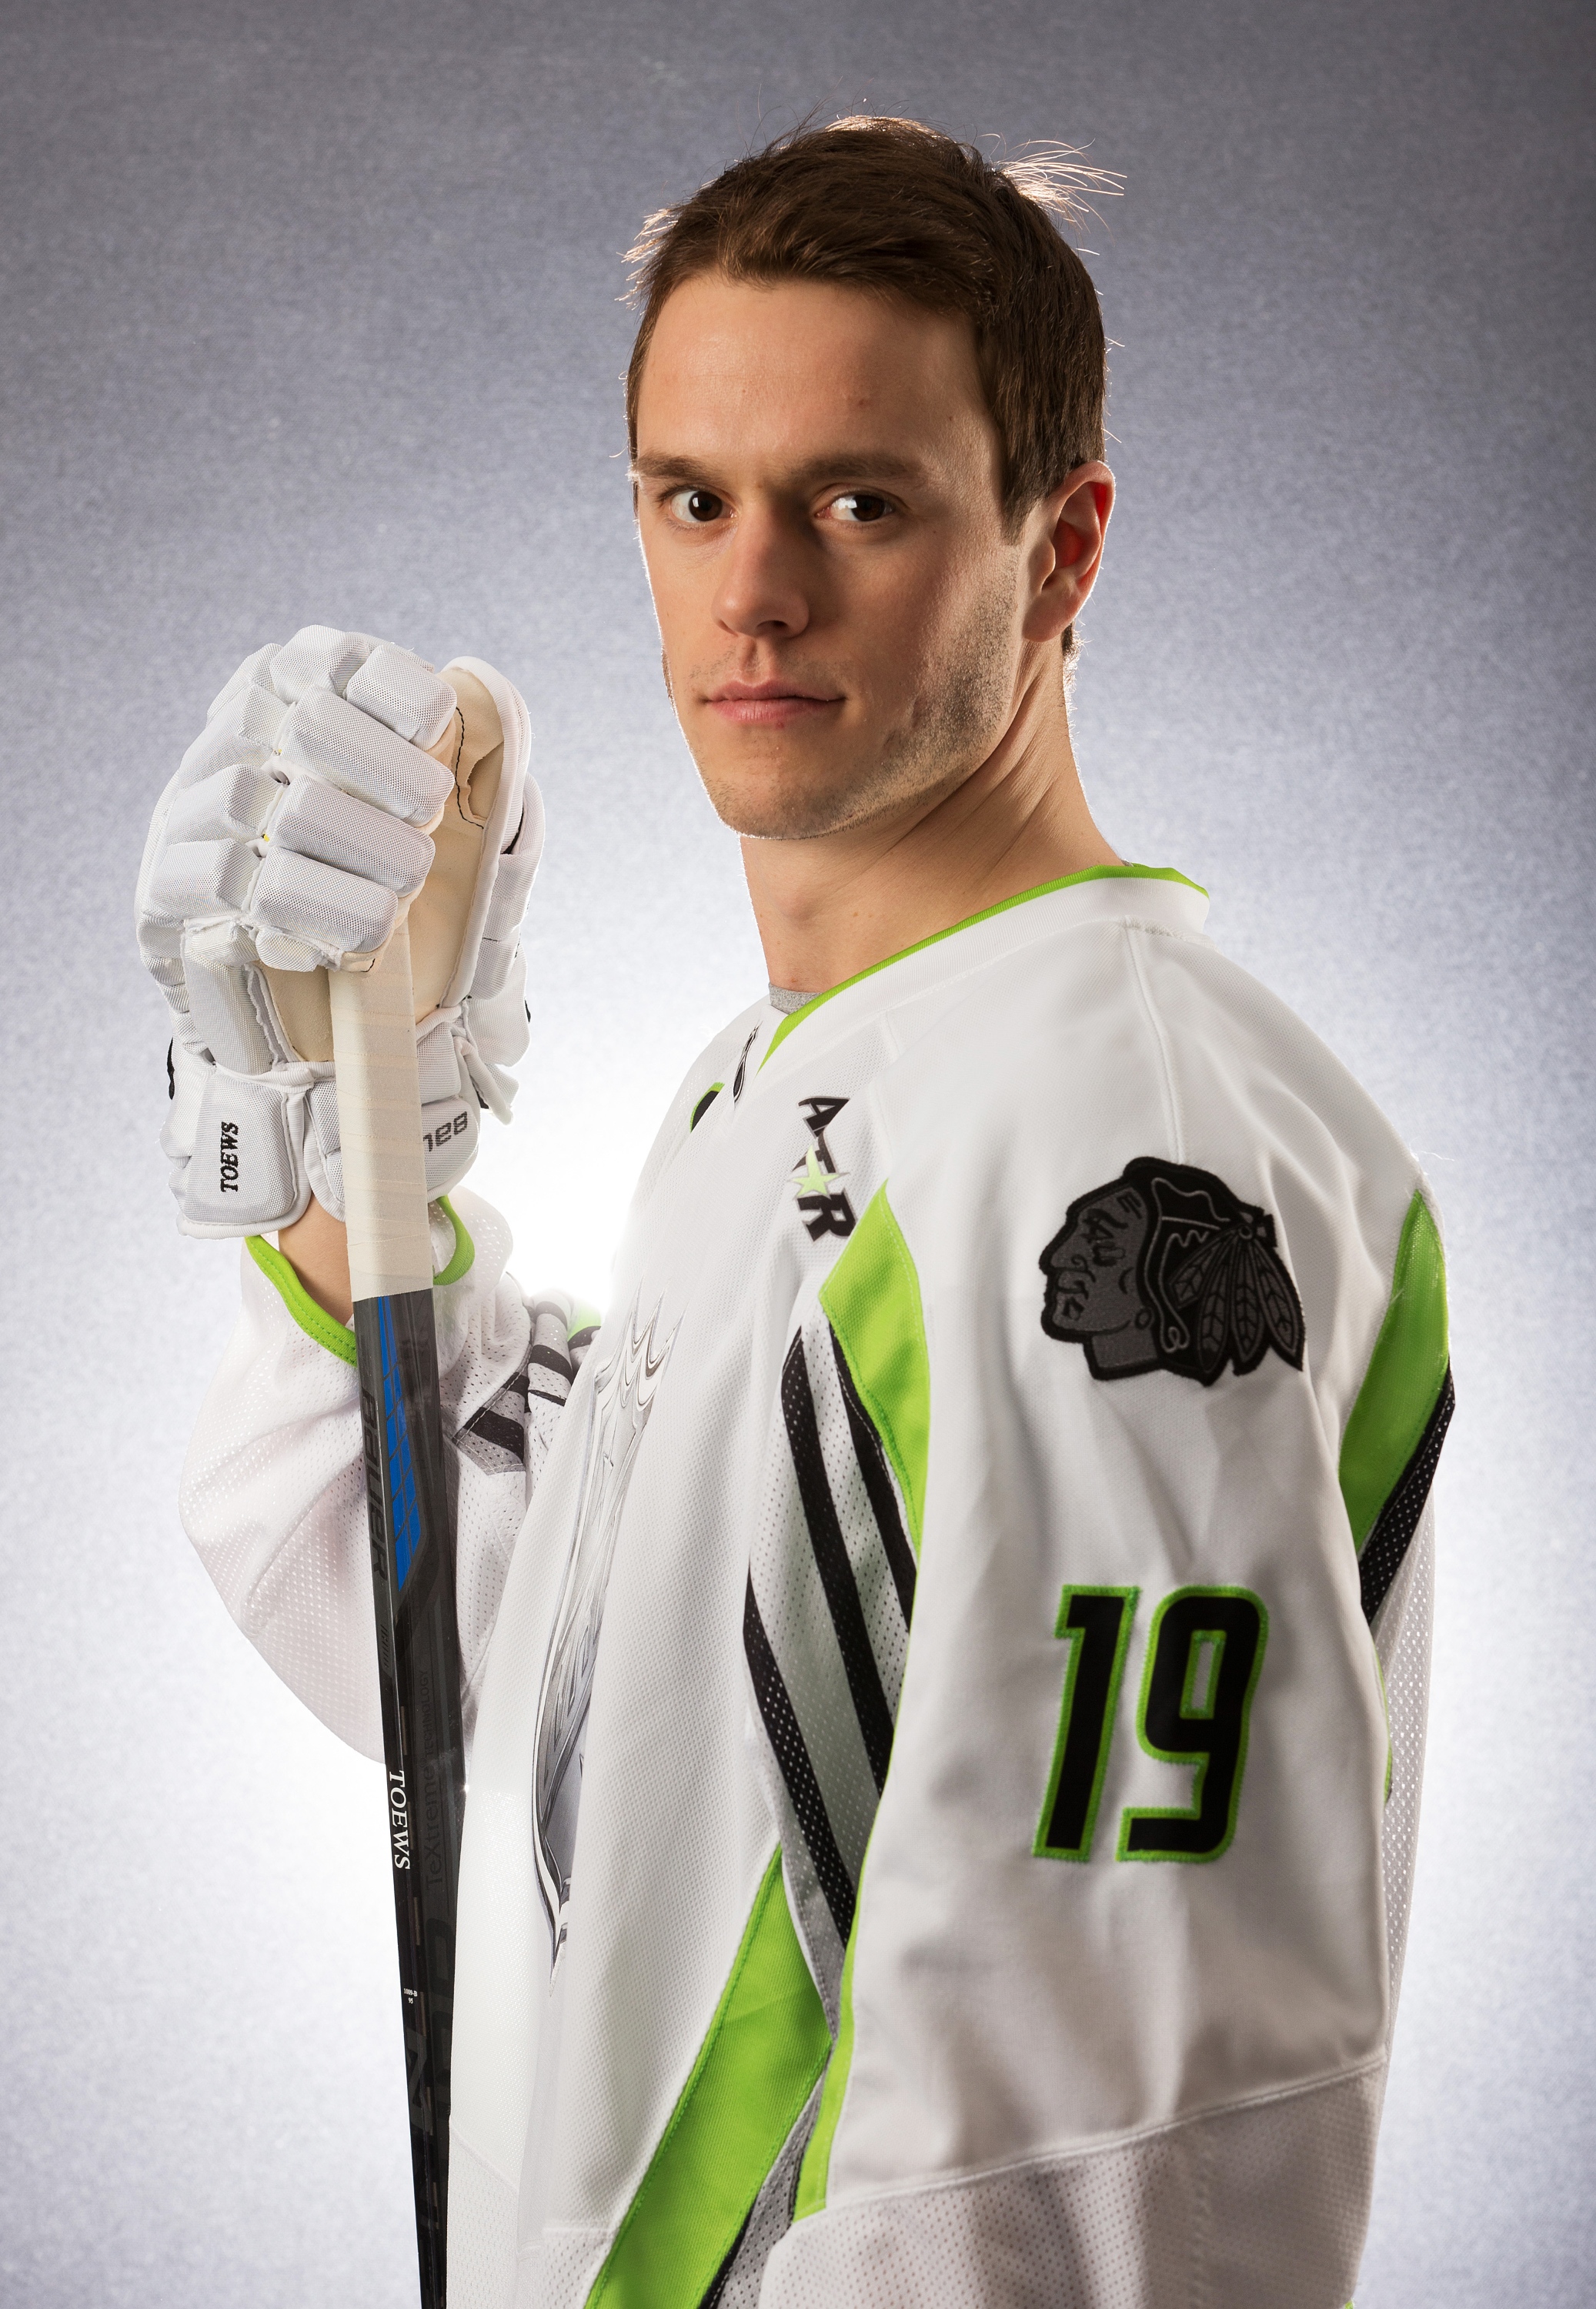 COLUMBUS, OH - JANUARY 25:  Jonathan Toews #19 of the Chicago Blackhawks and Team Toews poses for a portrait prior to the 2015 Honda NHL All-Star Game at Nationwide Arena on January 25, 2015 in Columbus, Ohio.  (Photo by Gregory Shamus/Getty Images)